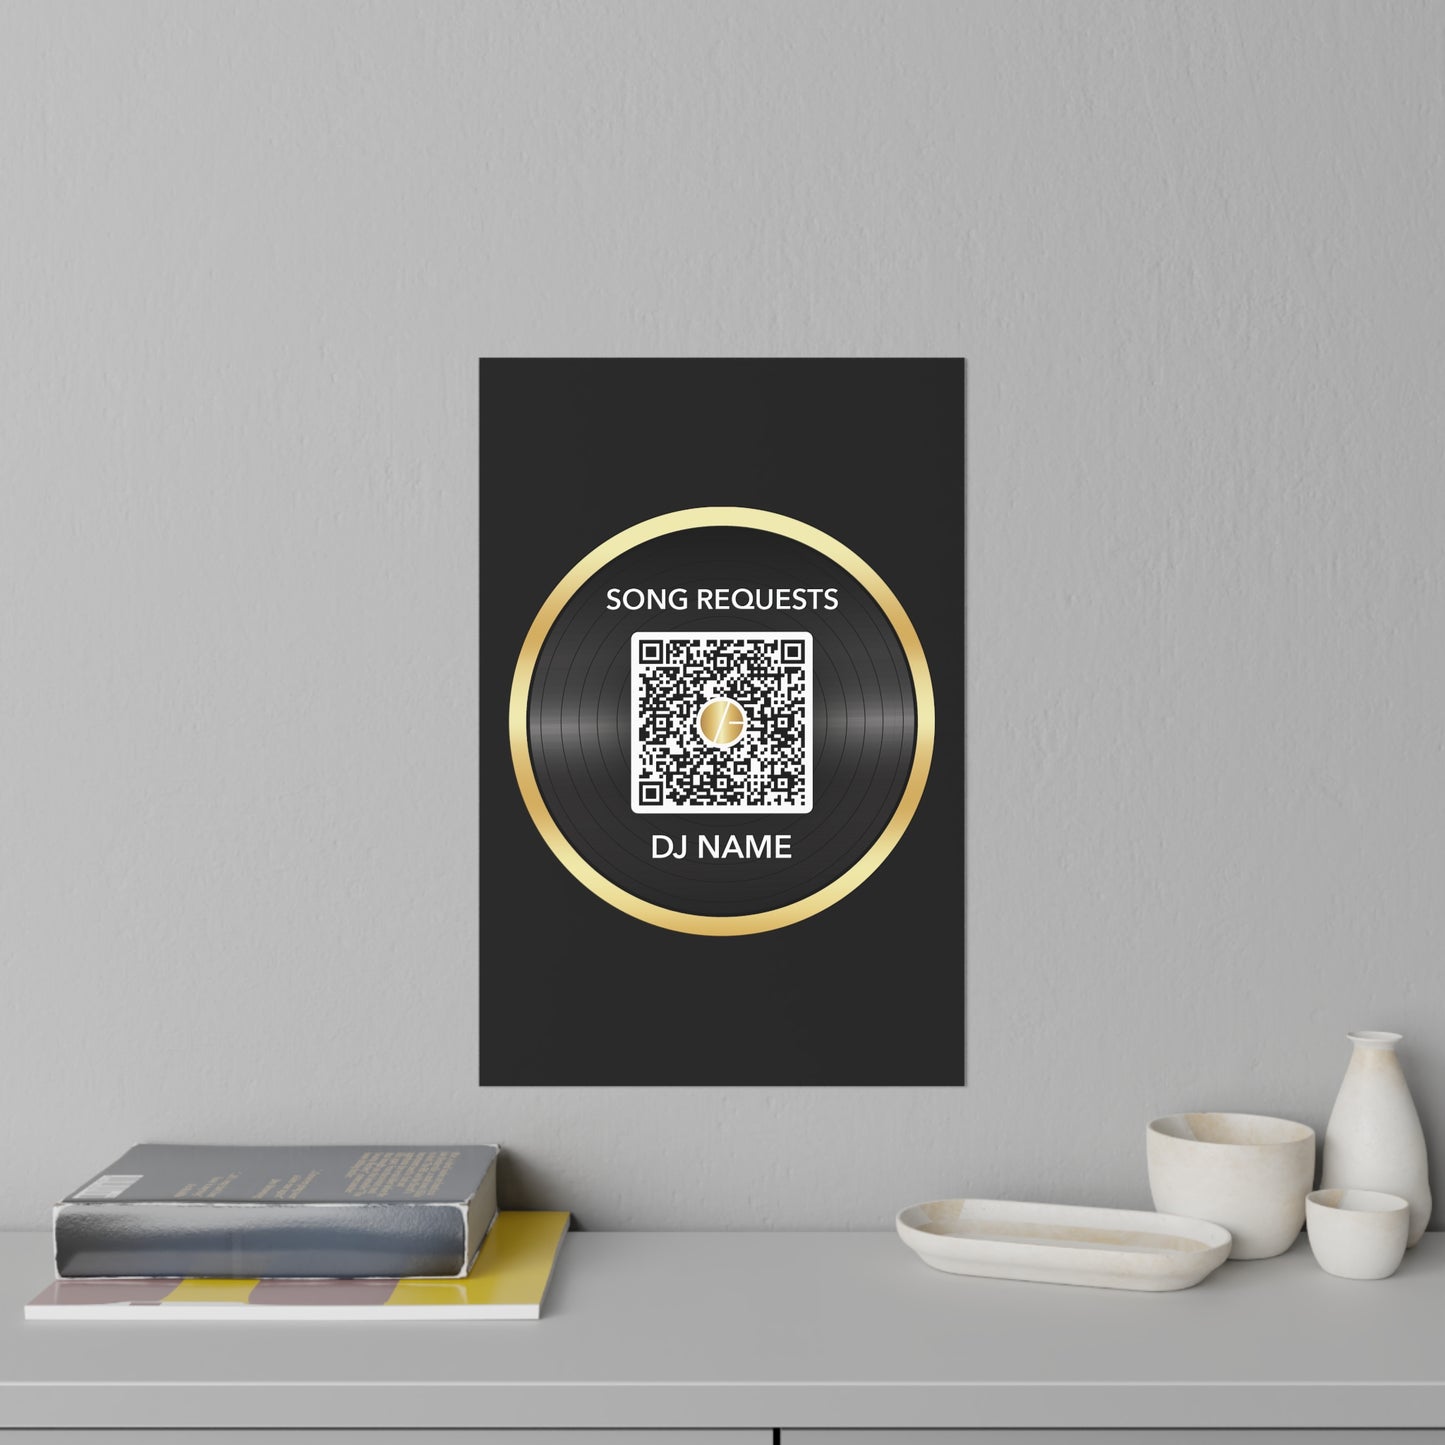 My QR Code - Wall Decals